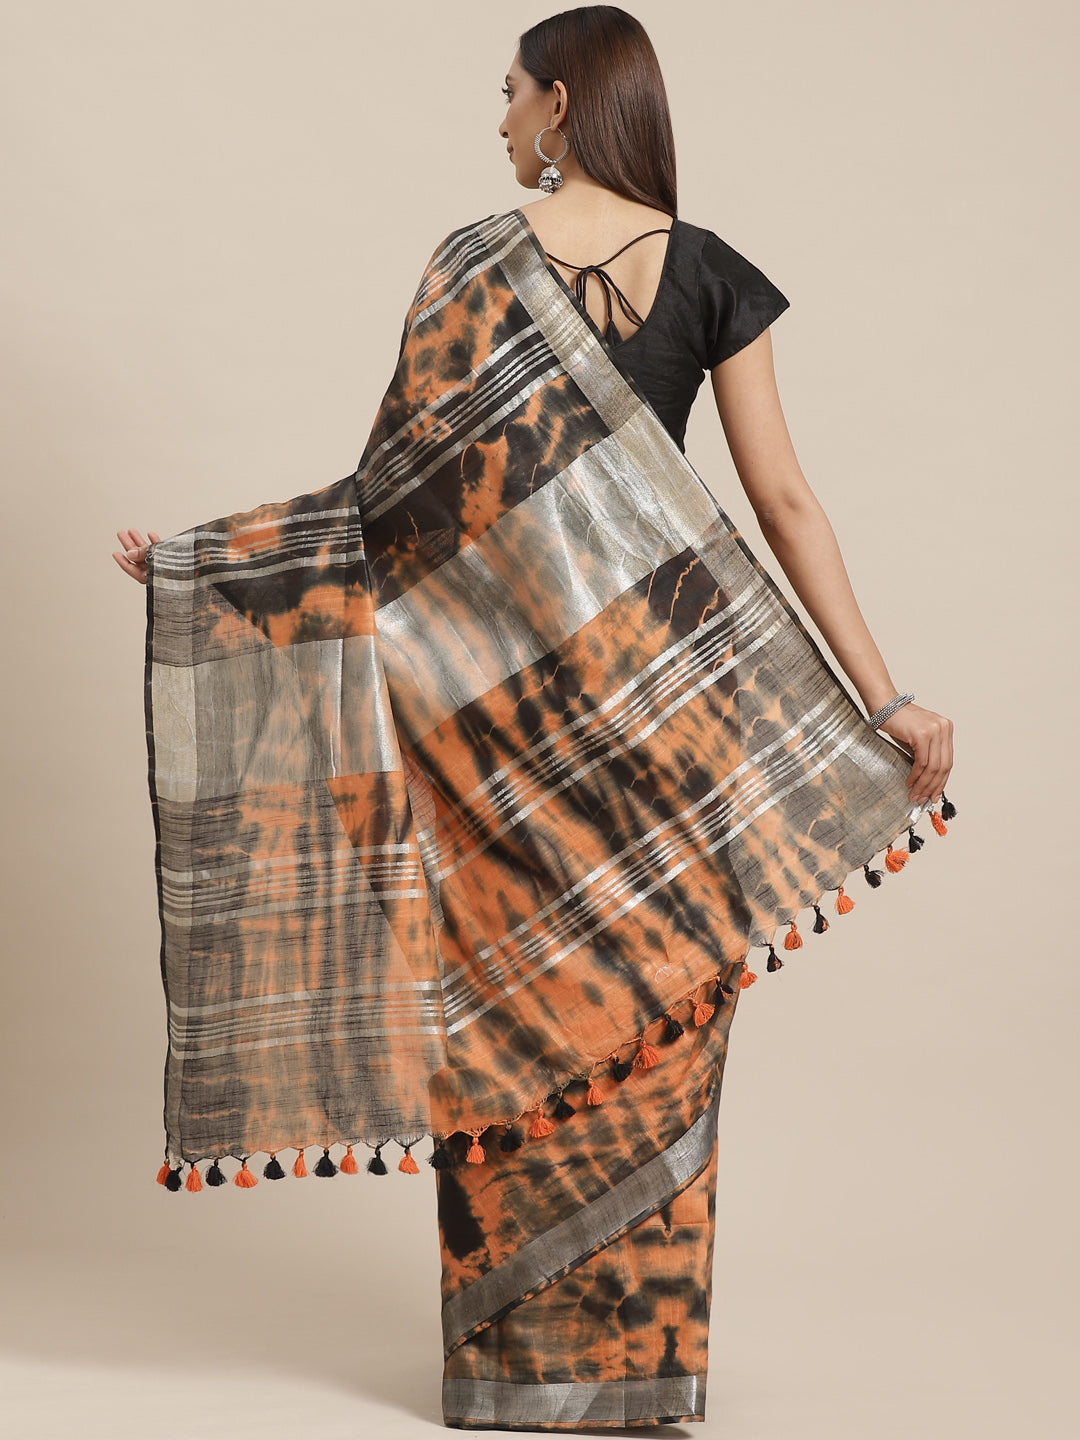 Orange and White, Kalakari India Linen Shibori Woven Saree and Blouse ALBGSA0058-Saree-Kalakari India-ALBGSA0058-Cotton, Geographical Indication, Hand Crafted, Heritage Prints, Linen, Natural Dyes, Red, Sarees, Shibori, Sustainable Fabrics, Woven, Yellow-[Linen,Ethnic,wear,Fashionista,Handloom,Handicraft,Indigo,blockprint,block,print,Cotton,Chanderi,Blue, latest,classy,party,bollywood,trendy,summer,style,traditional,formal,elegant,unique,style,hand,block,print, dabu,booti,gift,present,glamorous,